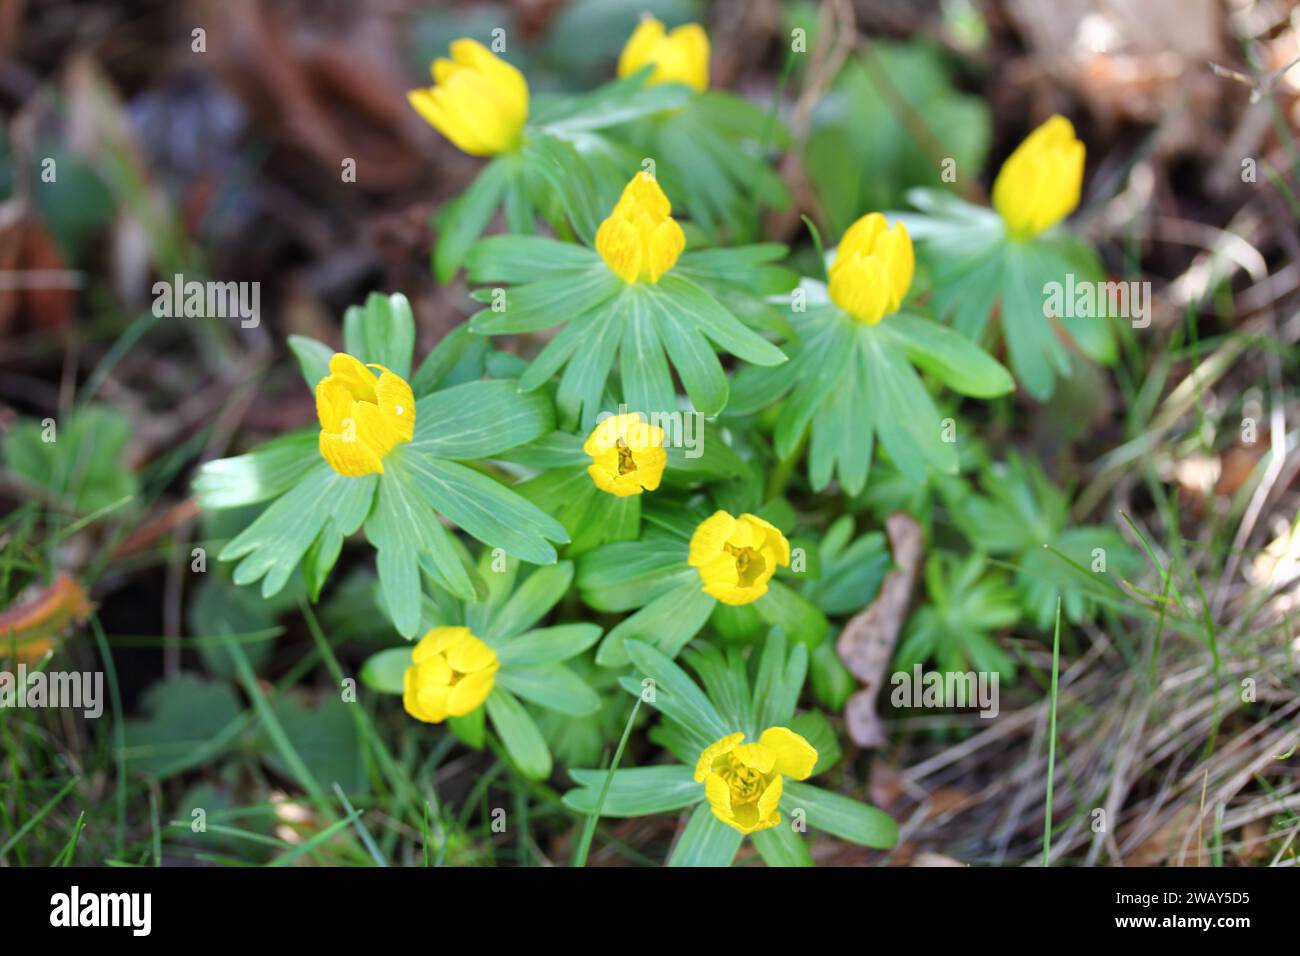 Eranthis hyemalis is a species of flowering plant in the buttercup family Ranunculaceae, native to calcareous woodland habitats in France, Italy and t Stock Photo